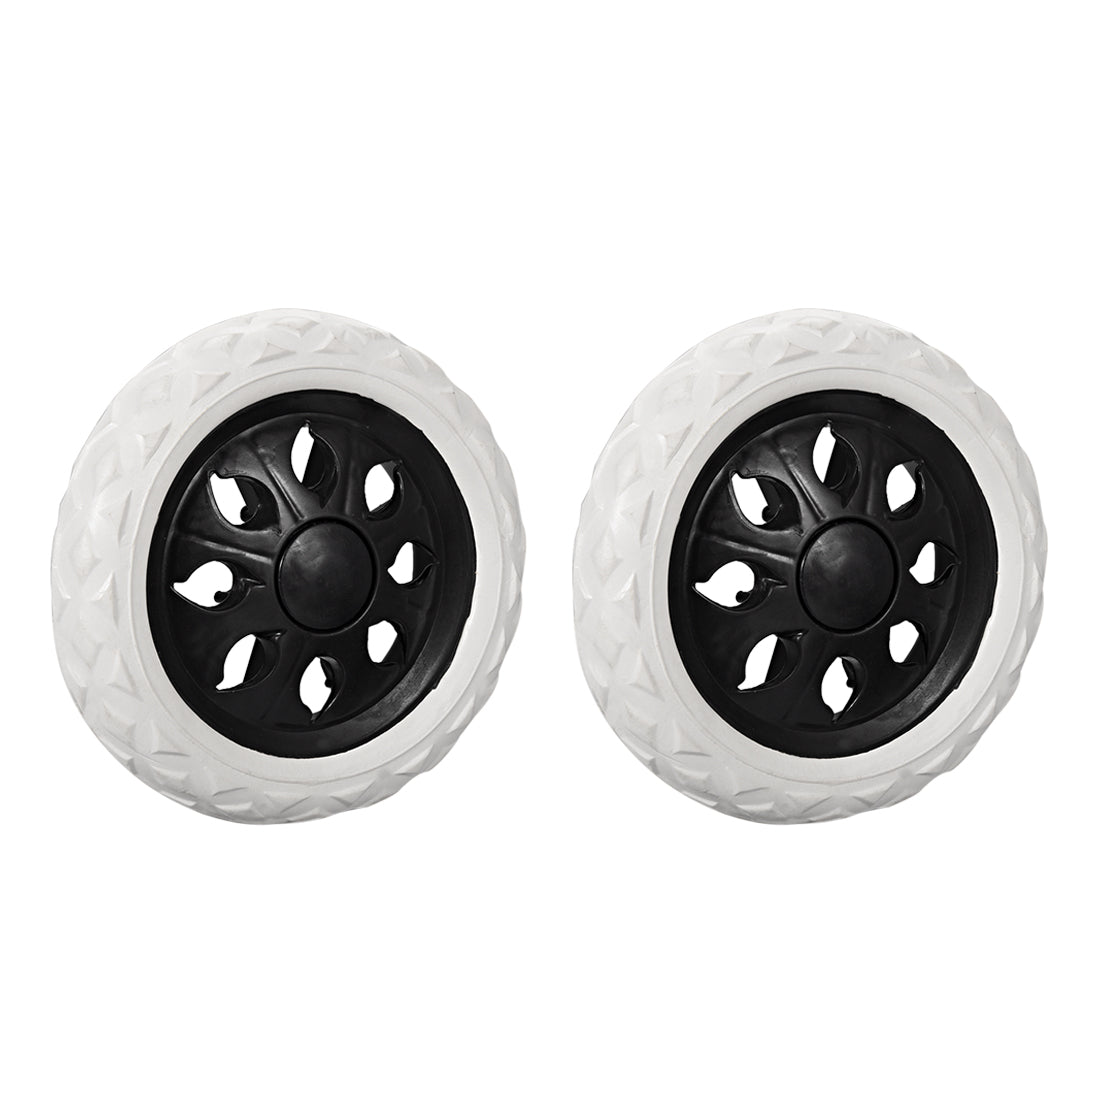 uxcell Uxcell Shopping Cart Wheels Trolley Caster Replacement mm Dia Rubber Foaming 2pcs